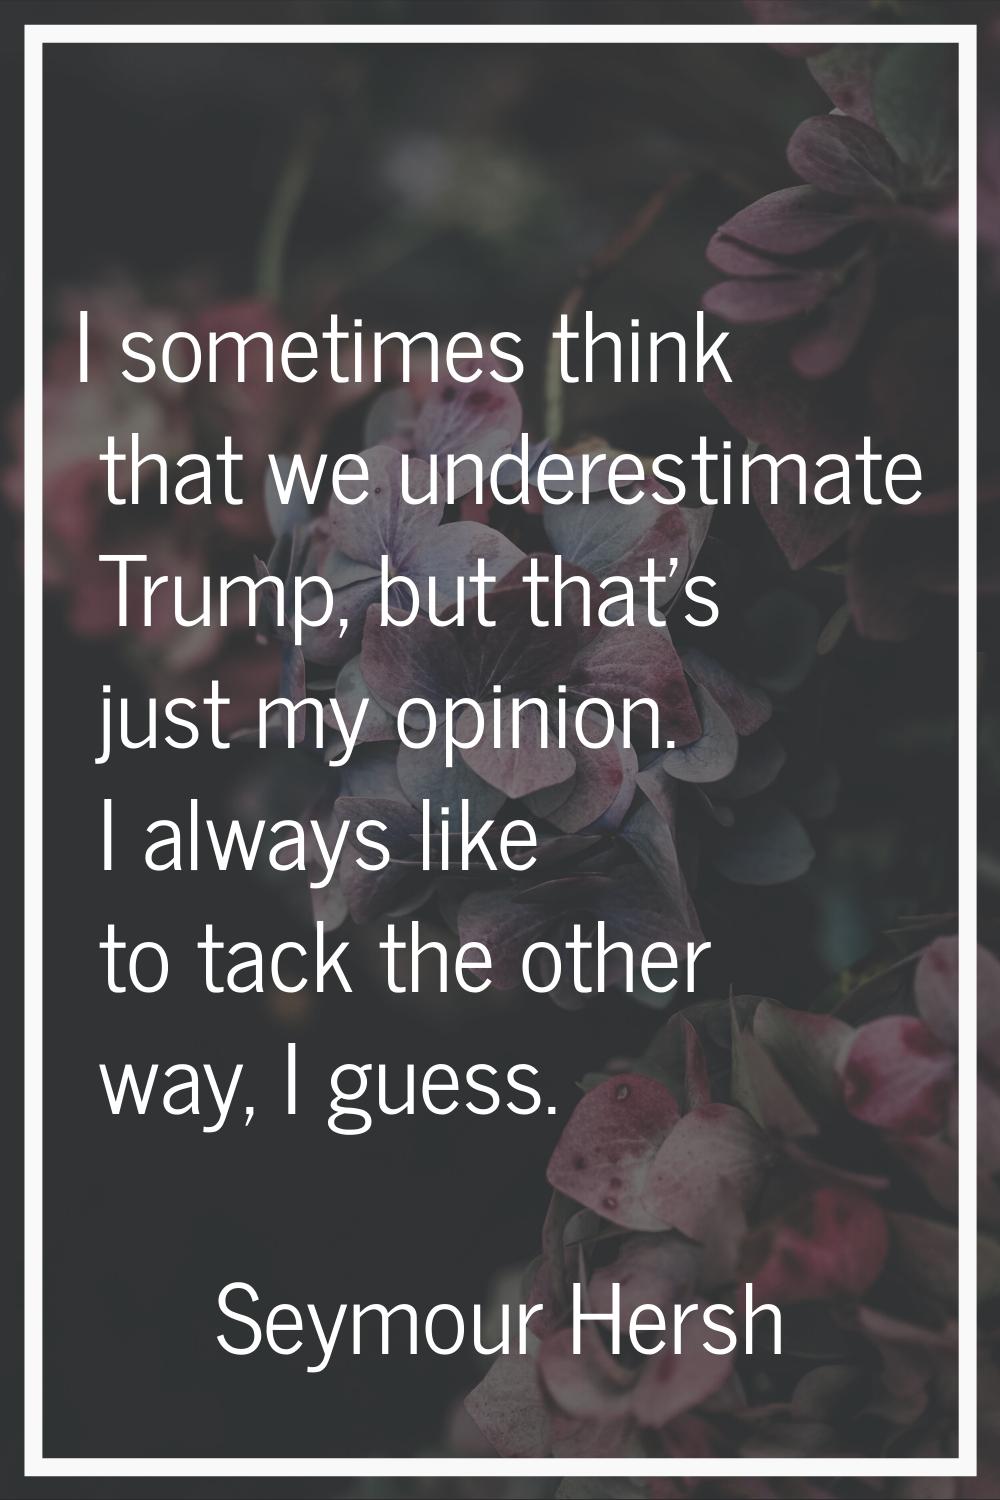 I sometimes think that we underestimate Trump, but that's just my opinion. I always like to tack th